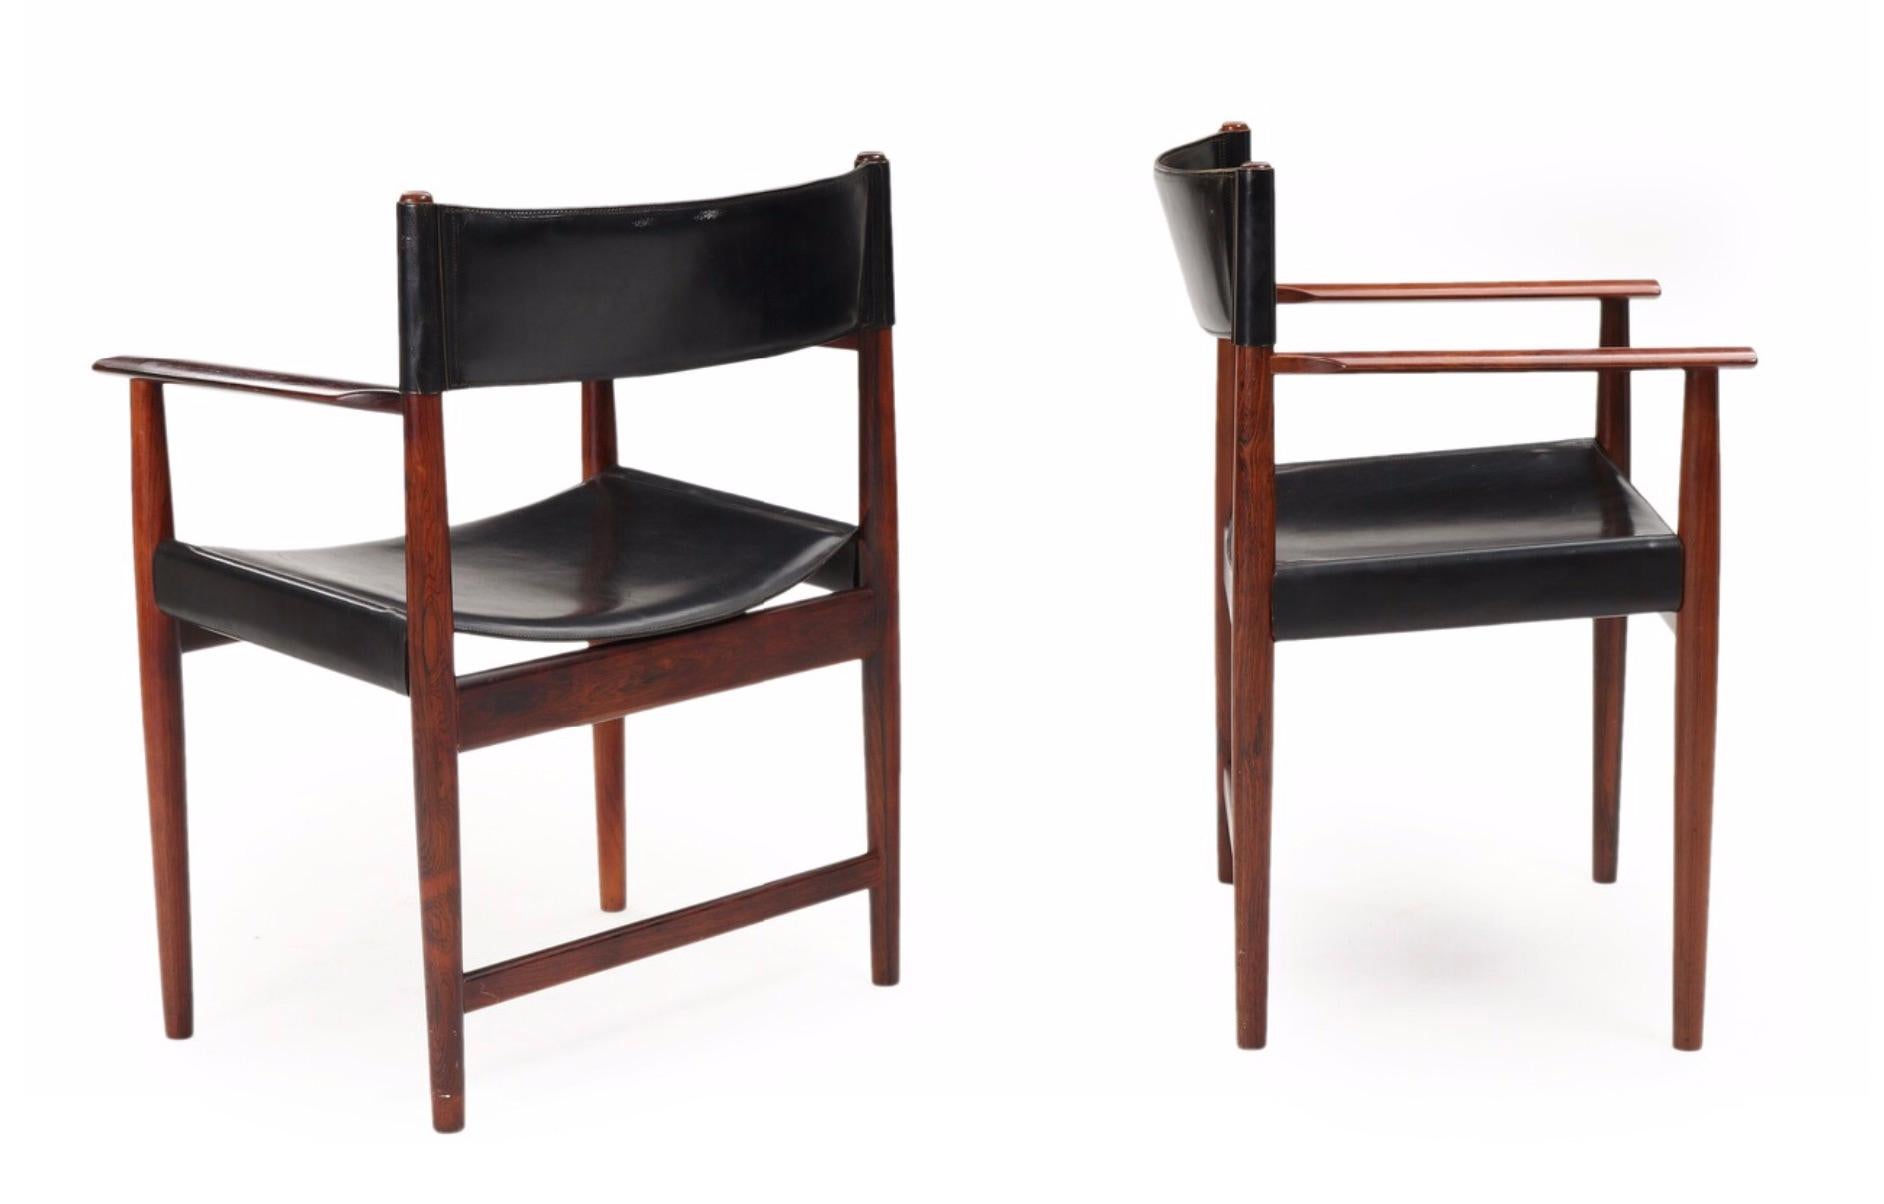 A pair of rosewood armchairs upholstered in seat and back with black full-grain leather.
Model 414. Designed 1961.
Manufactured and marked with metal plaque by Sibast Furniture. 

Additional images, close-ups and detailed condition report